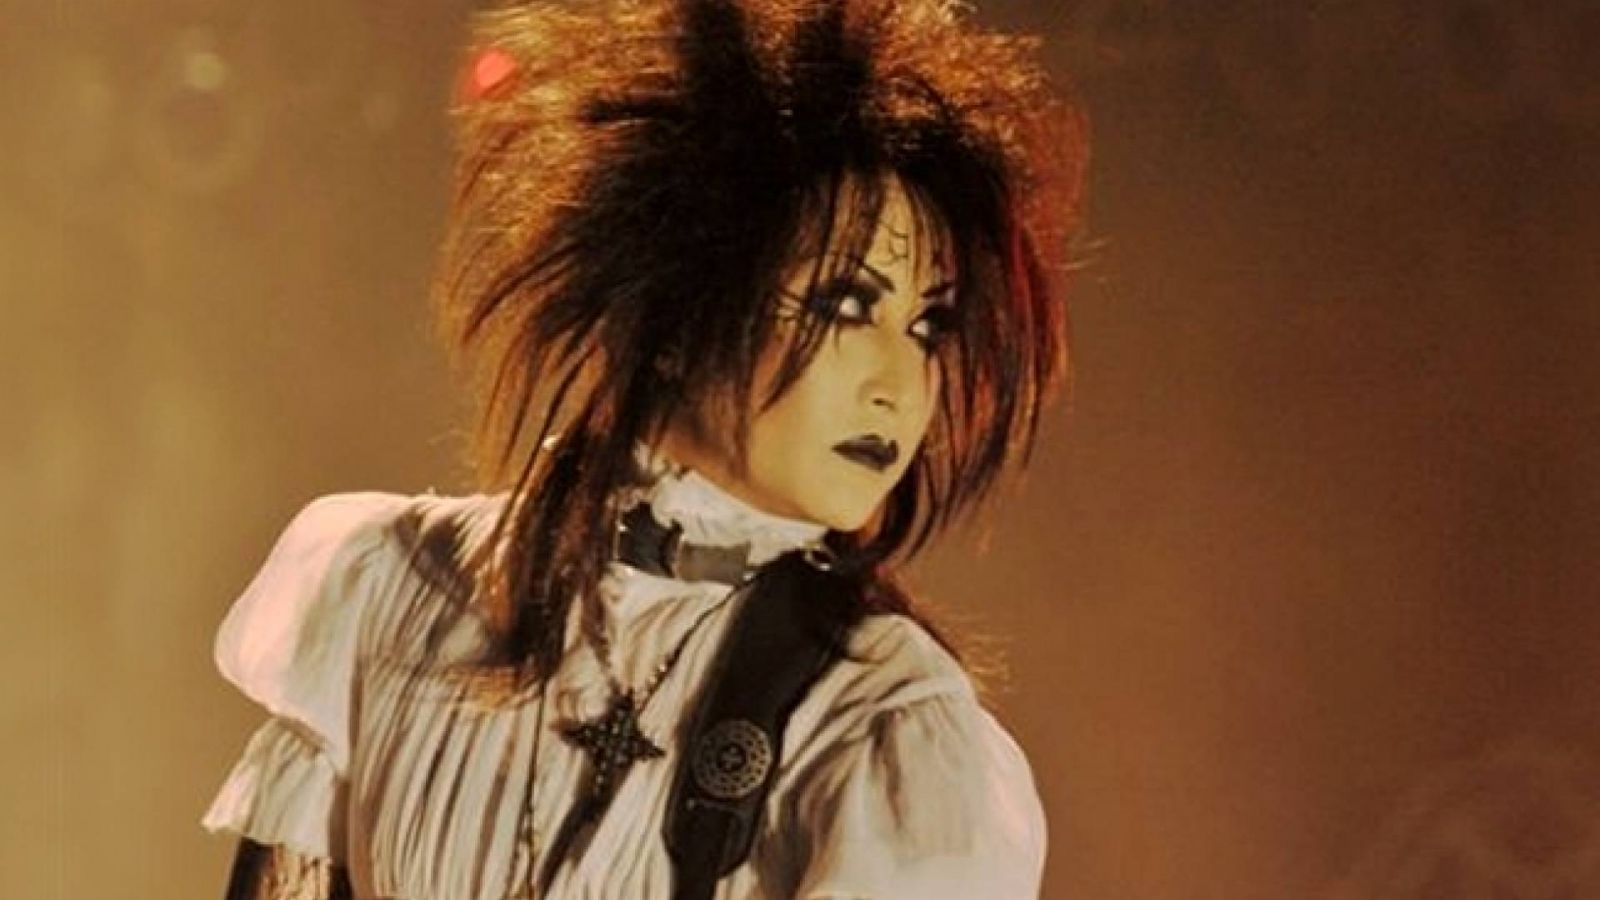 Moi dix Mois Interview and Panel at Anime Expo © Midi:Nette